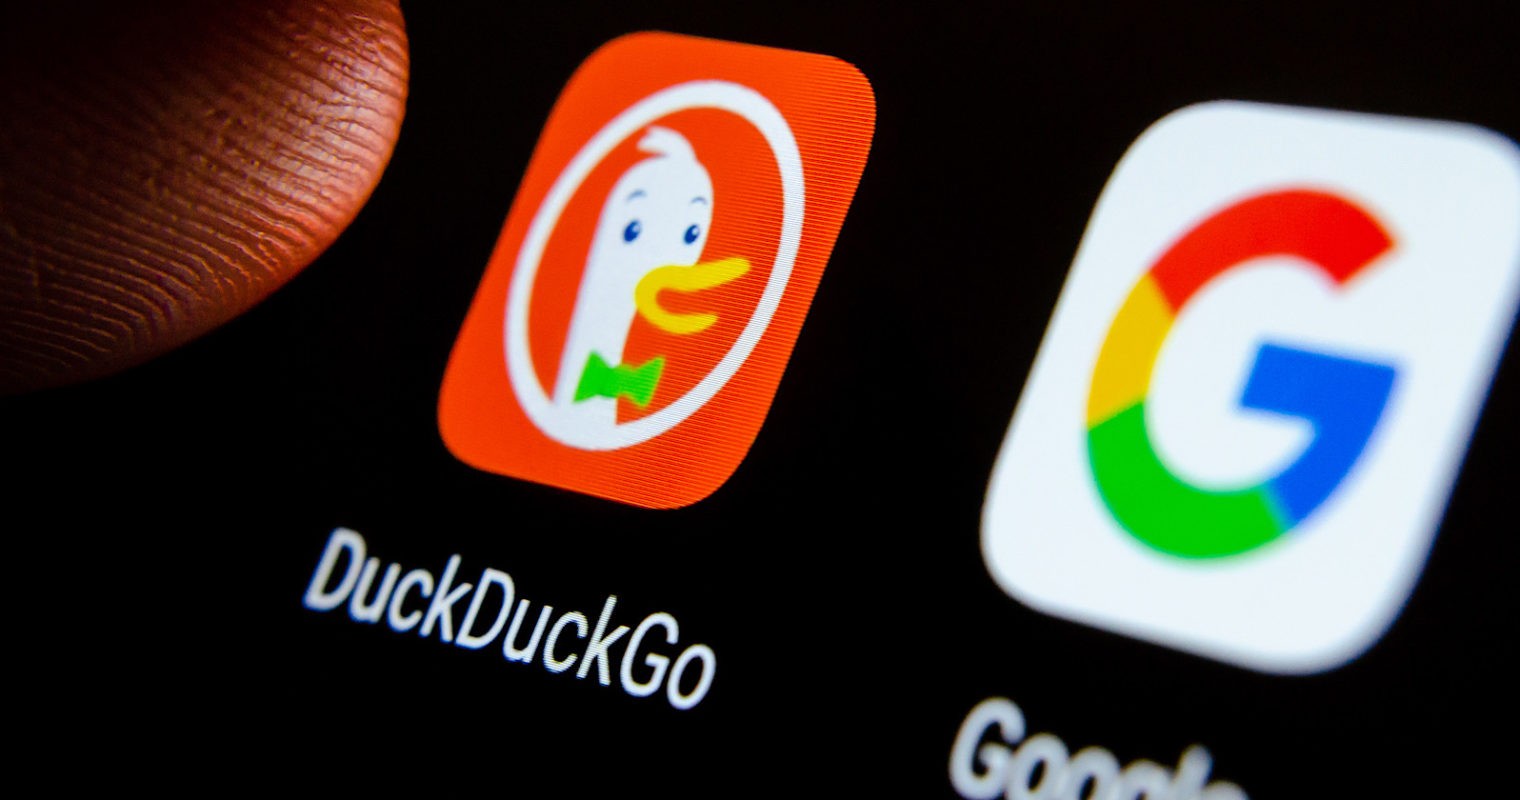 Beta version of DuckDuckGo is now available for Android users
